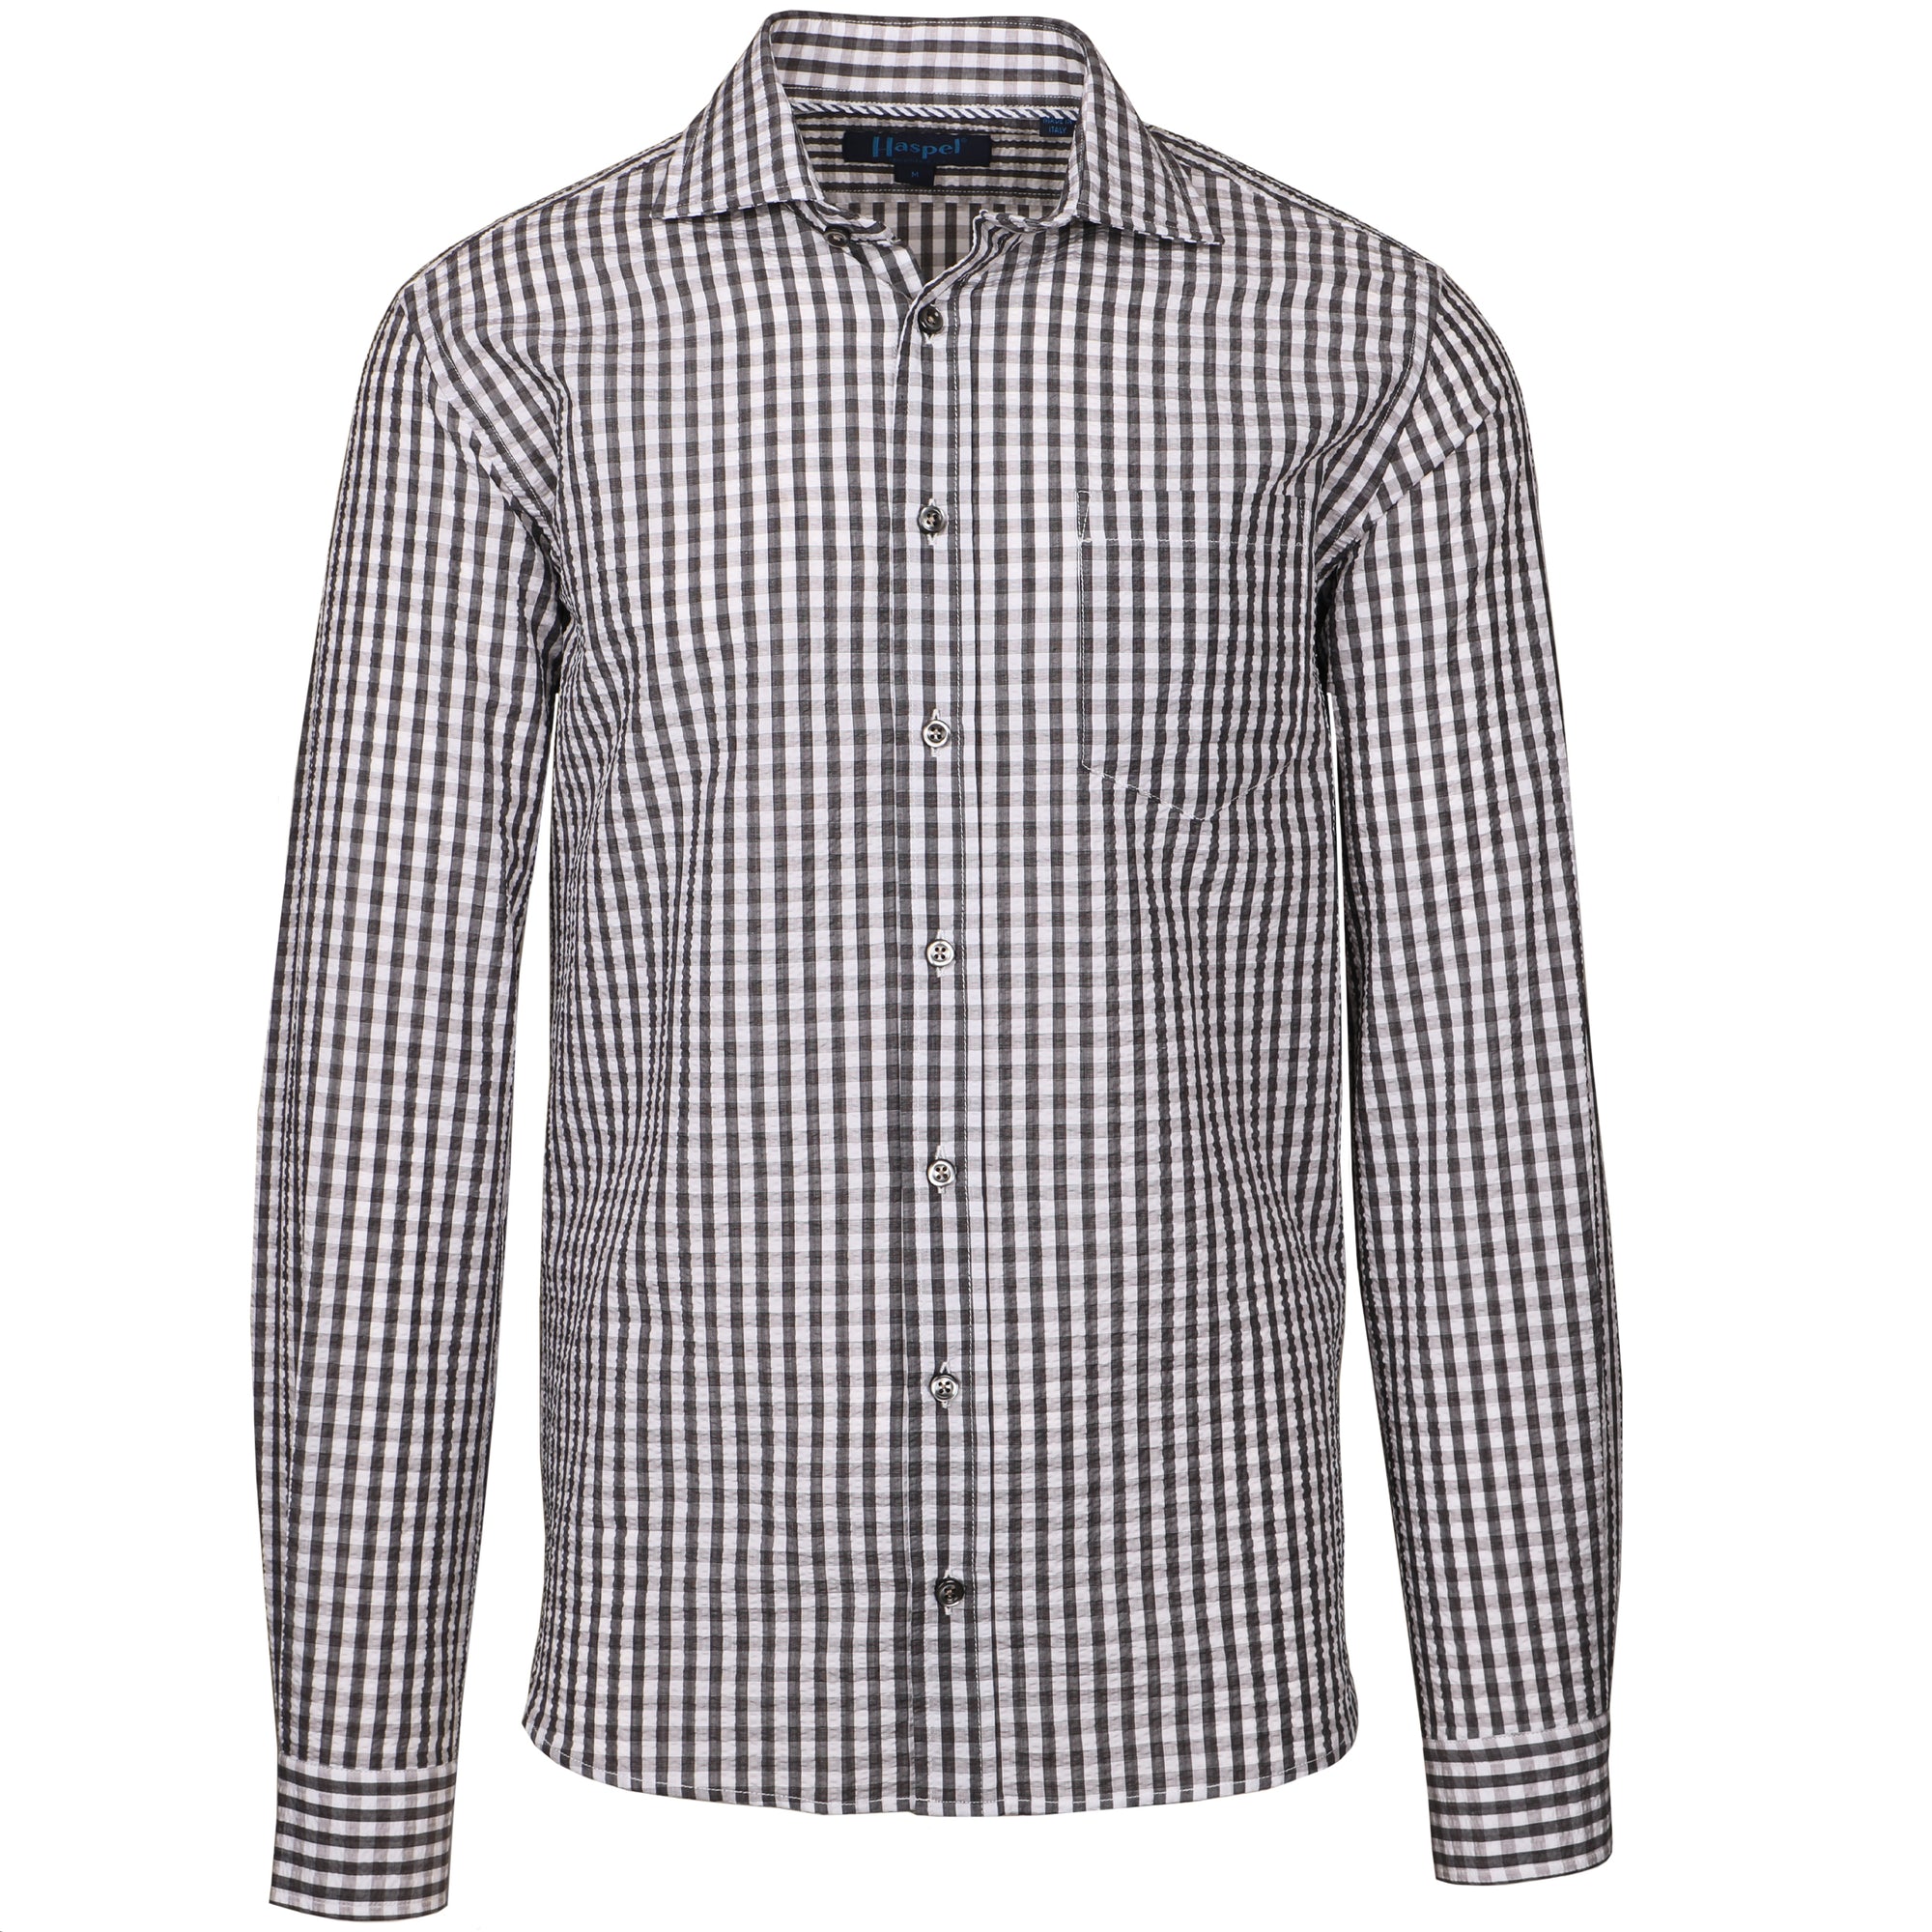 Seersucker in neutral grey check. Ready when you are and always ready for a good time.  100% Cotton Seersucker  •  Spread Collar  •  Long Sleeve  •  Chest Pocket  •  Machine Washable  •  Made in Italy  •  Return Policy